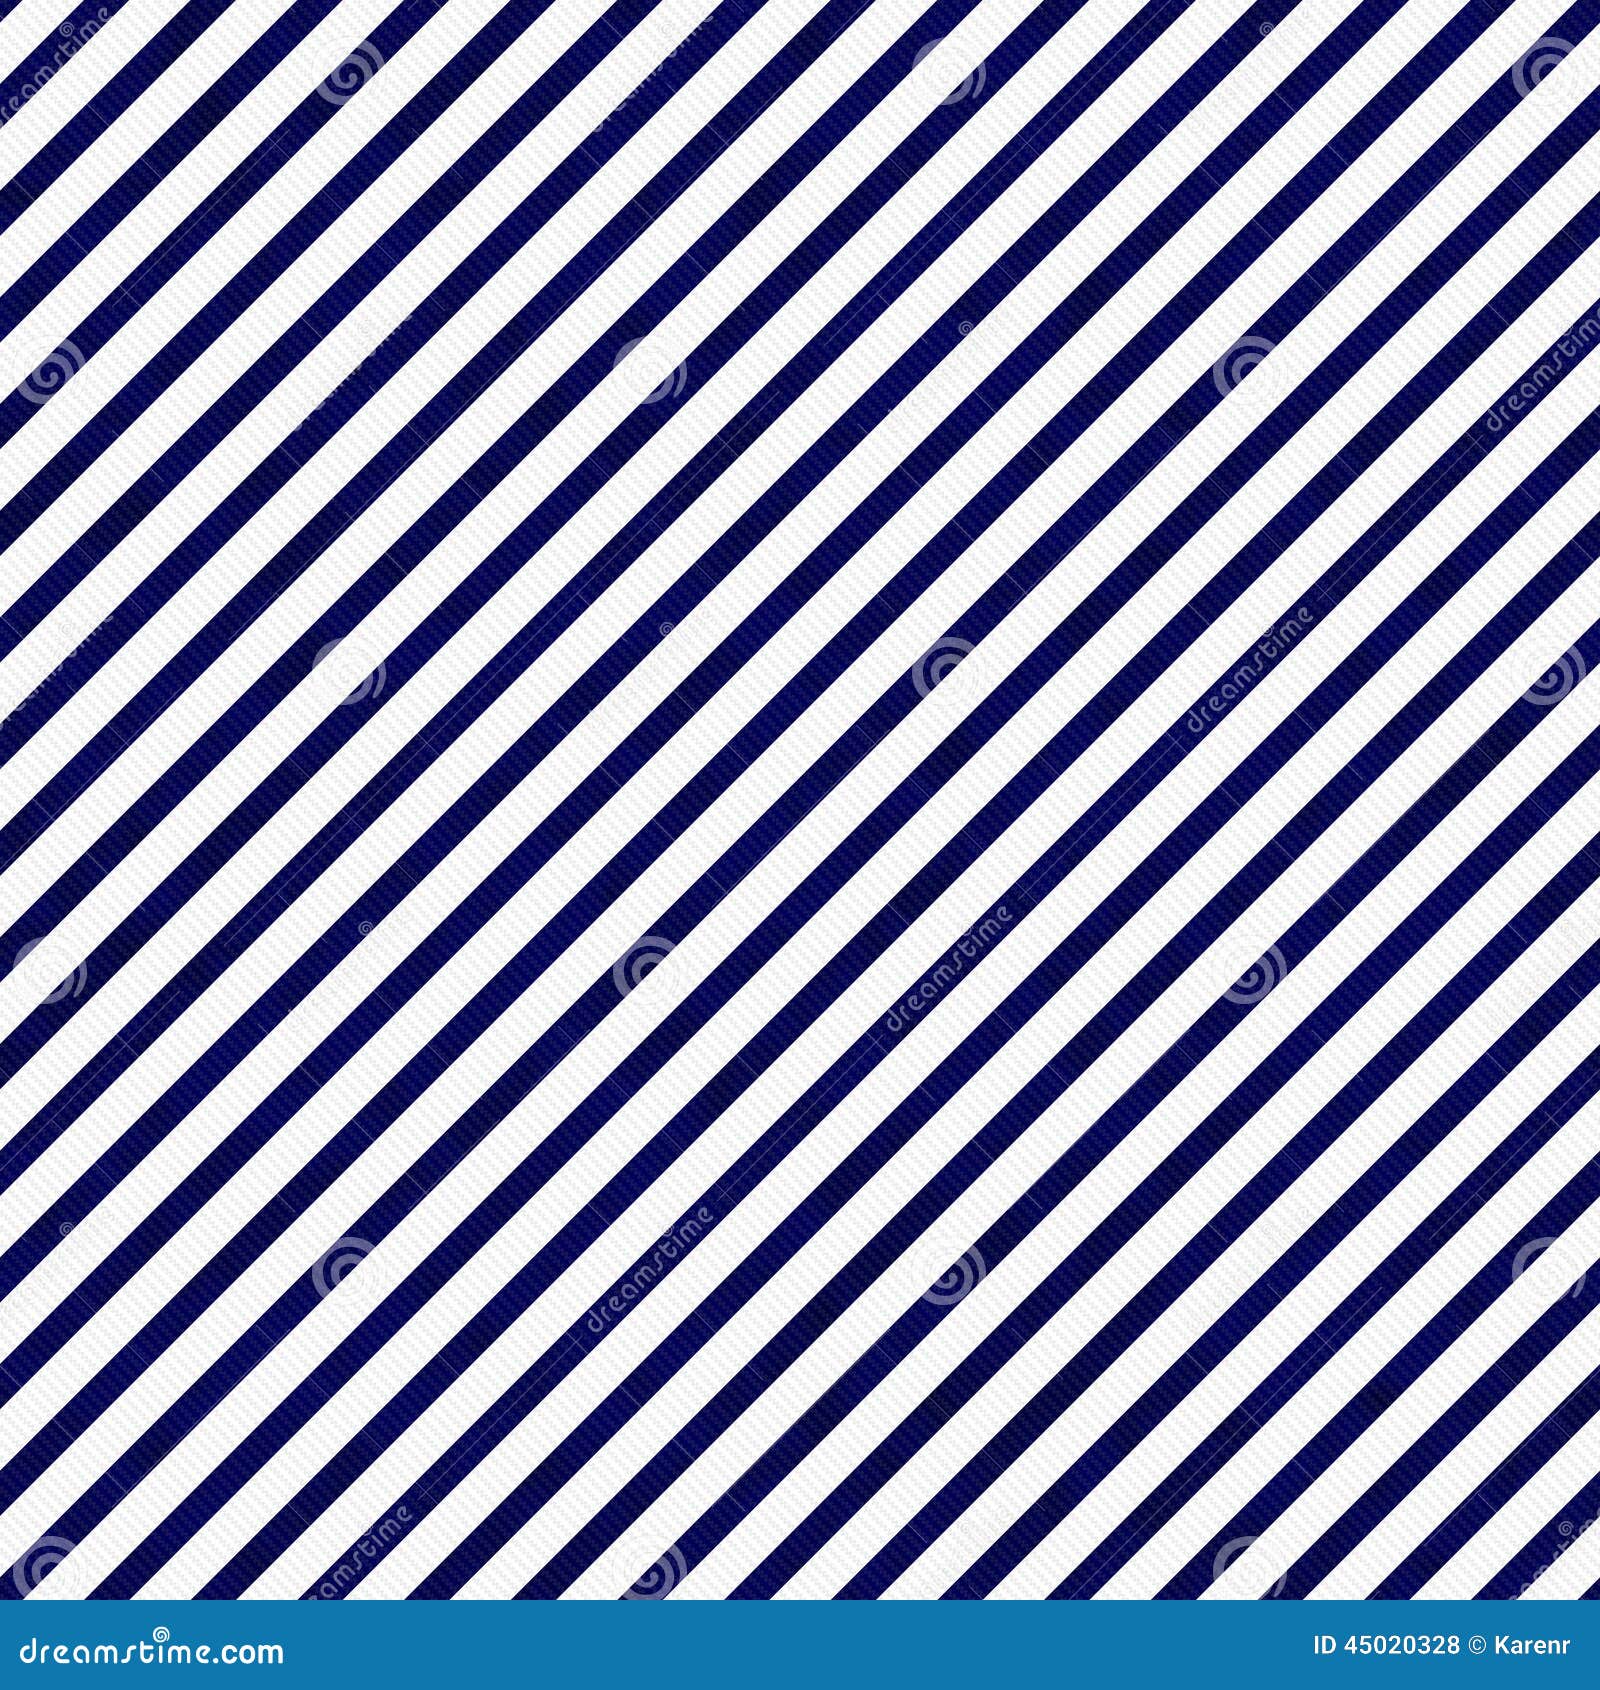 Navy Blue And White Striped Pattern Repeat Background Stock